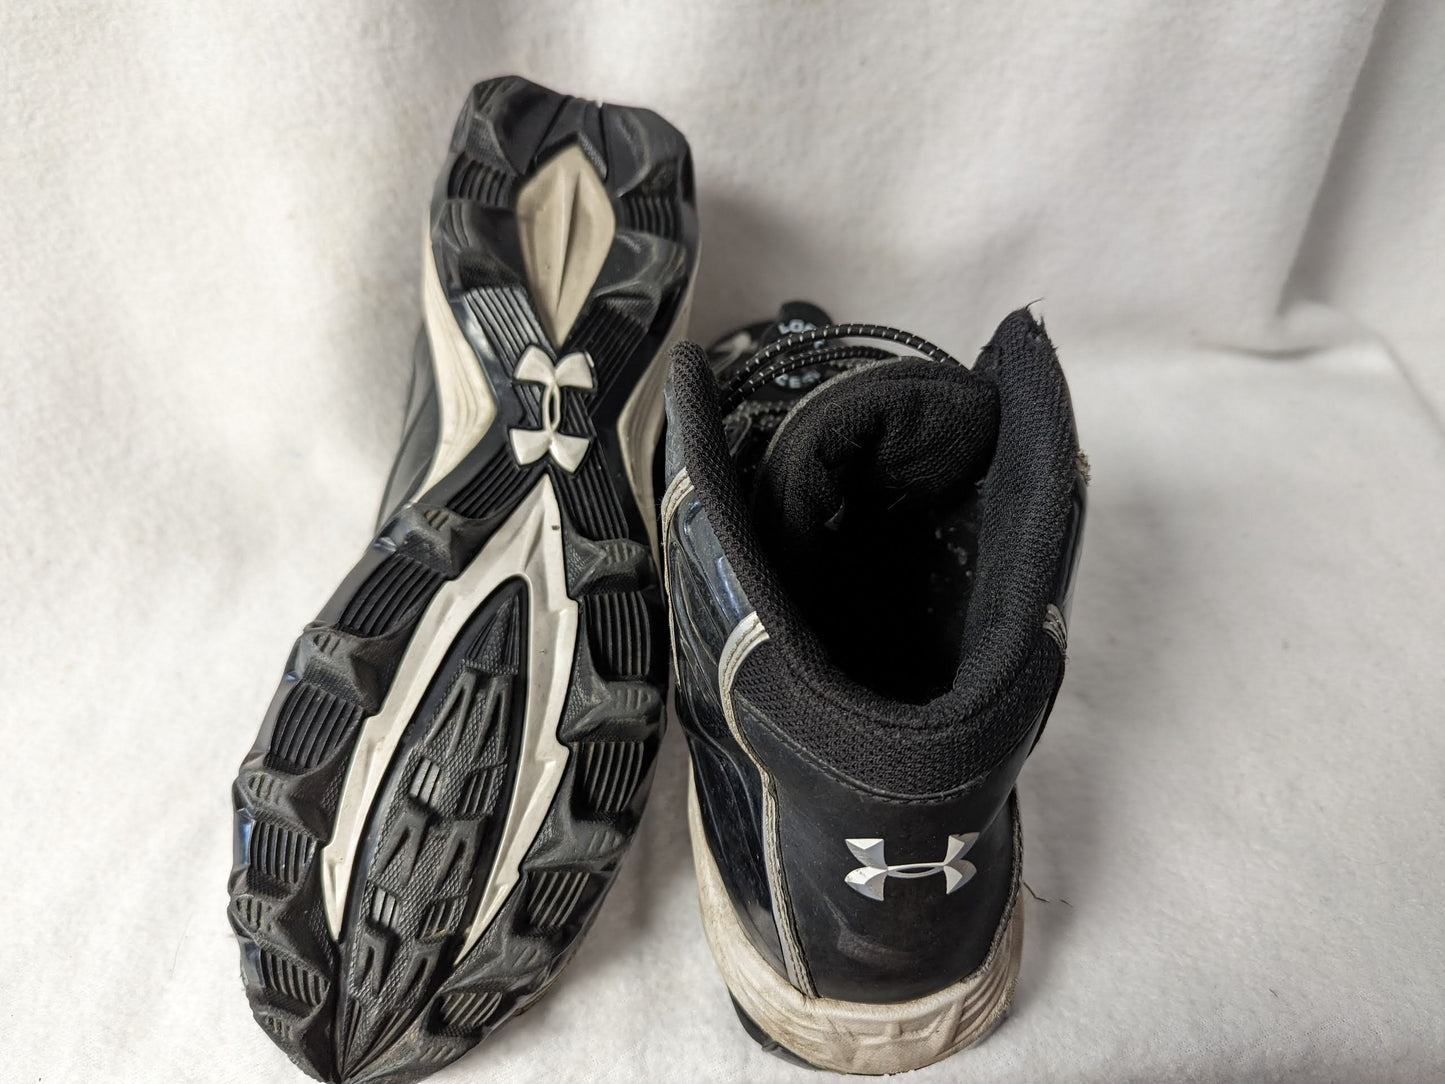 Under Armour Hammer Cleats Size 6 Color Black Condition Used